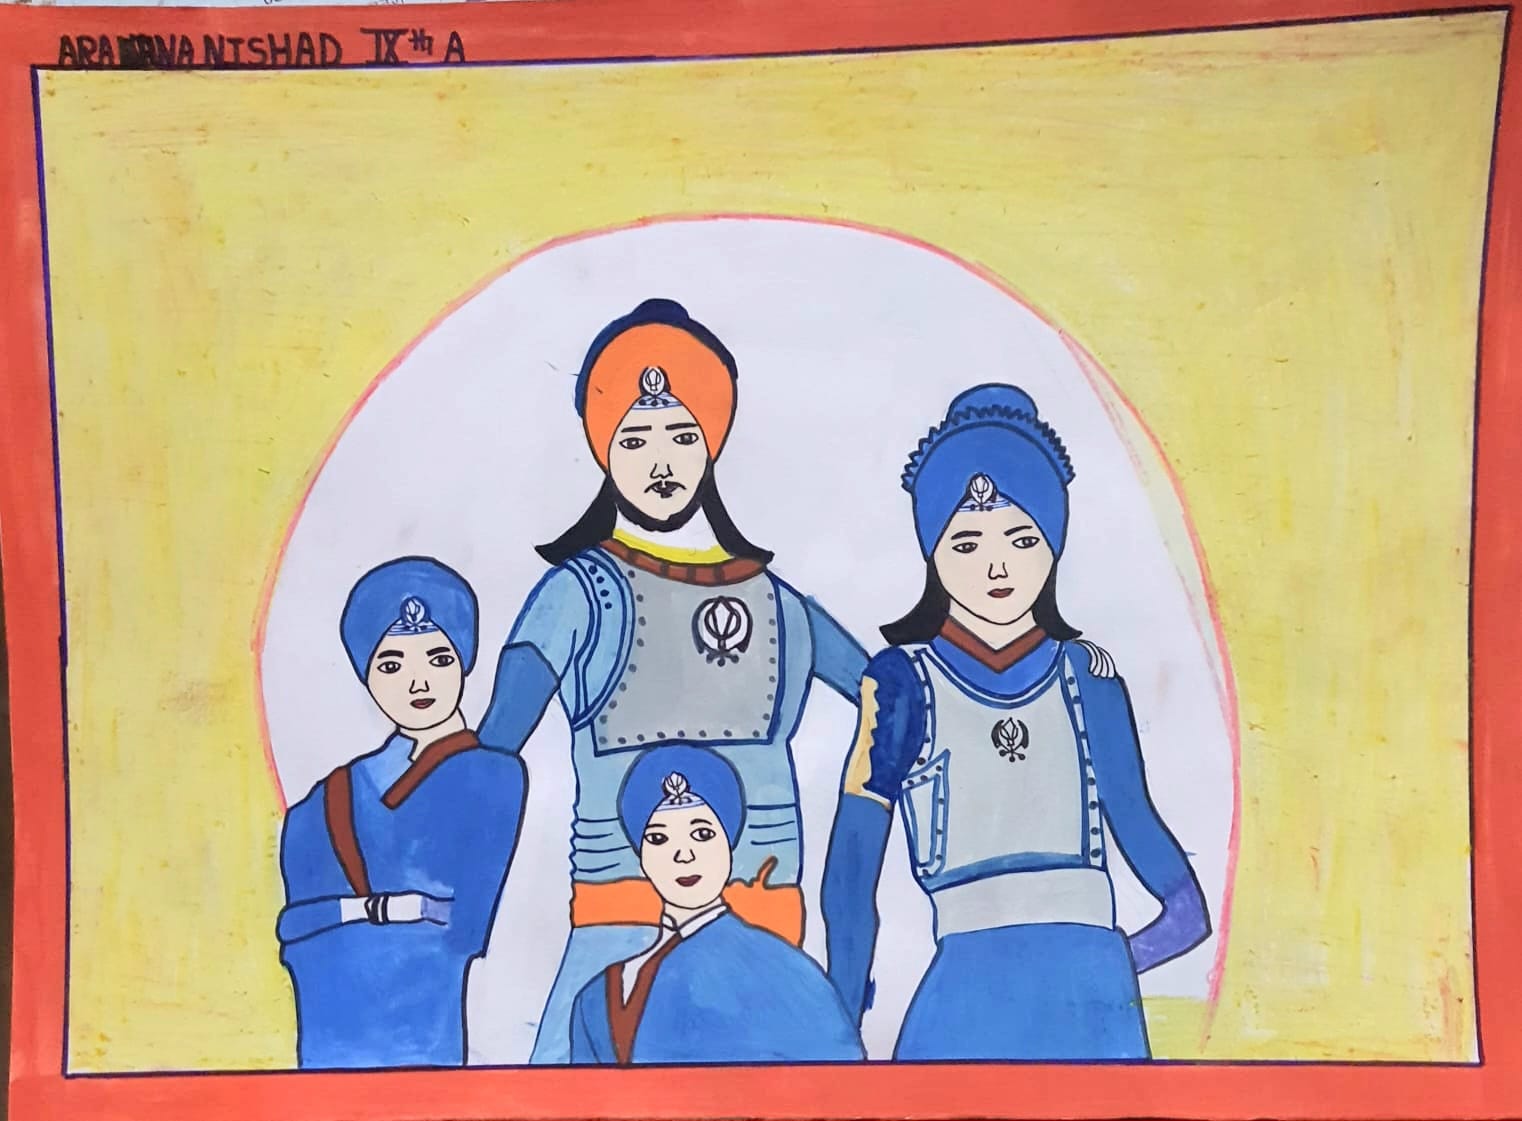 Share Charity UK - Here is the front page of Share Charity's Chardikala  book! Includes the Sangat Family, characters from the Why Am I Here Kids  book! This book explores how to